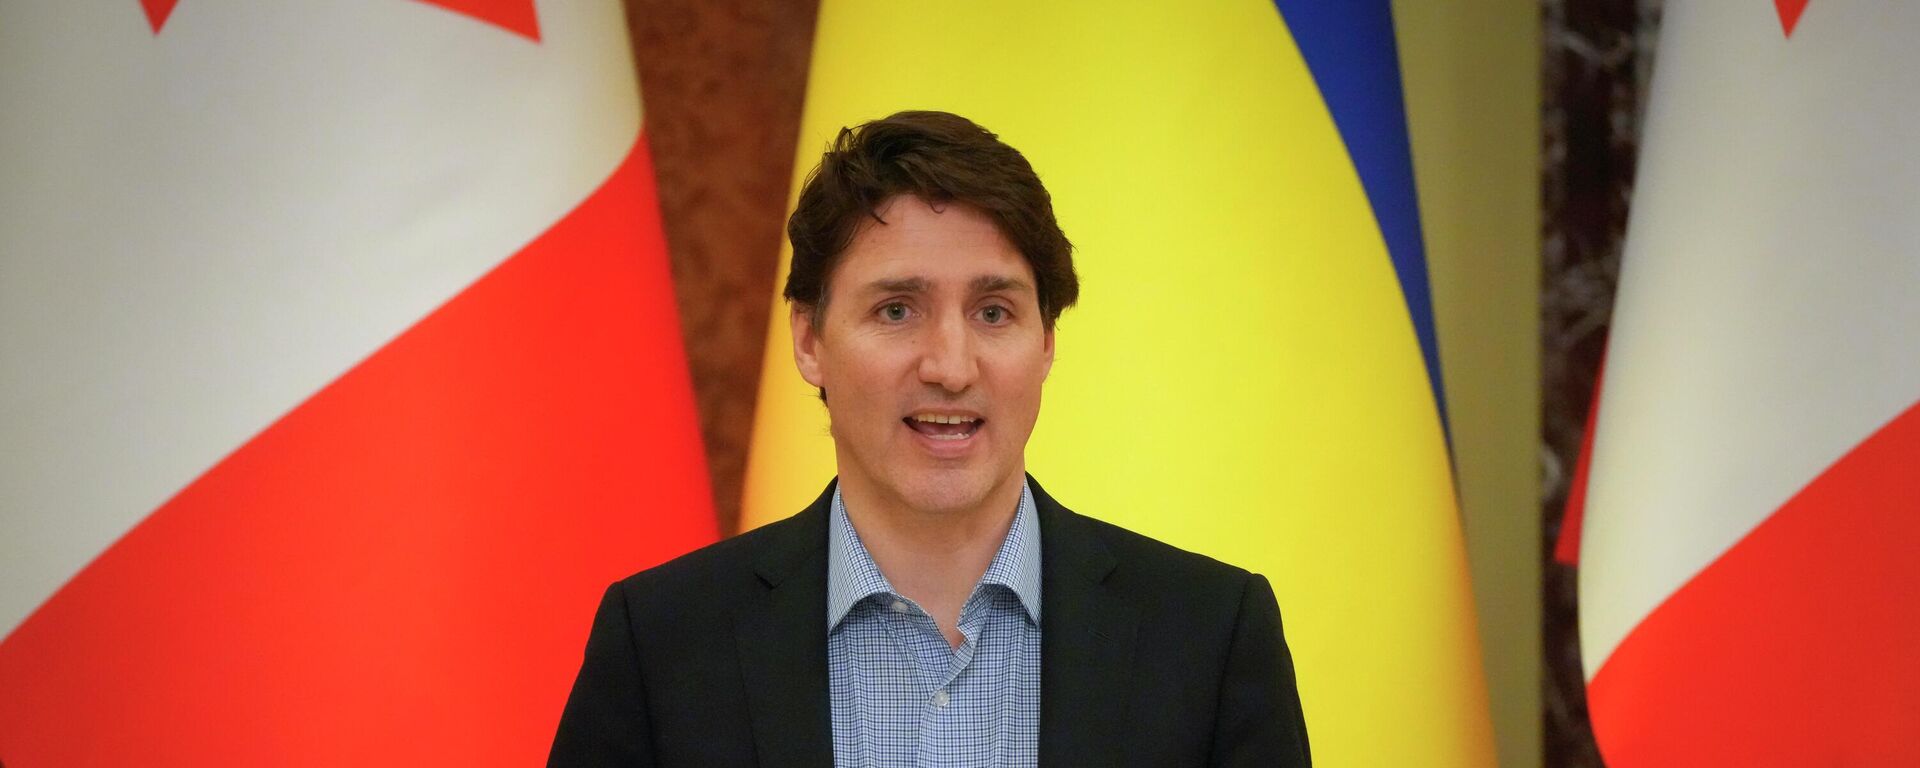 Canadian Prime Minister Justin Trudeau attends a news conference with Ukrainian President Volodymyr Zelenskyy after their meeting in Kyiv, Ukraine, Sunday, May 8, 2022. - Sputnik International, 1920, 18.05.2022